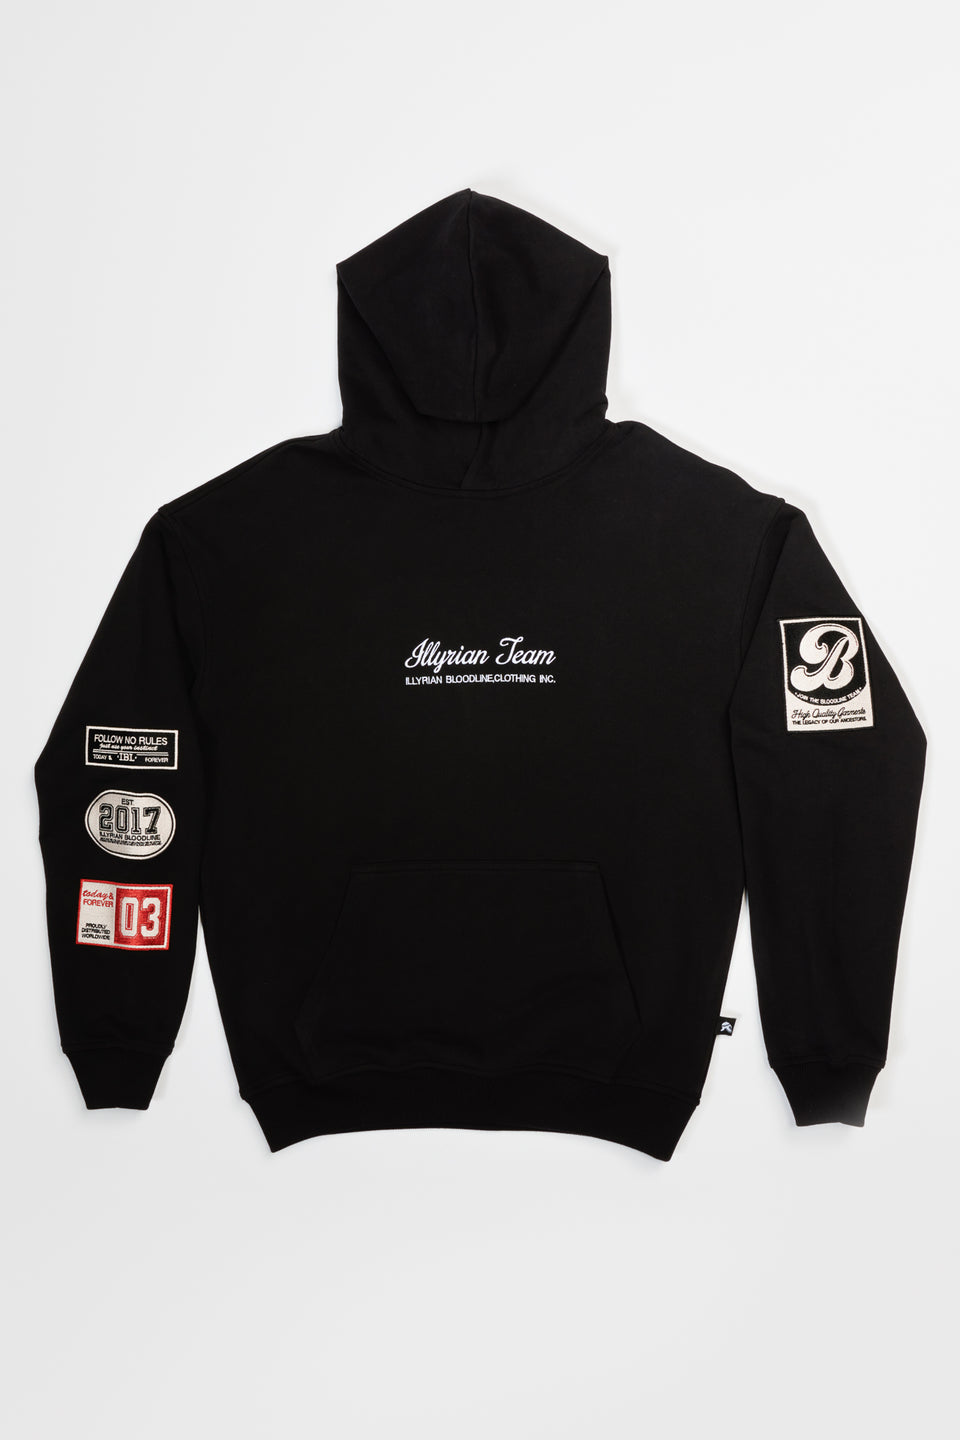 Illyrian SS24 Patch Hoodie - Black